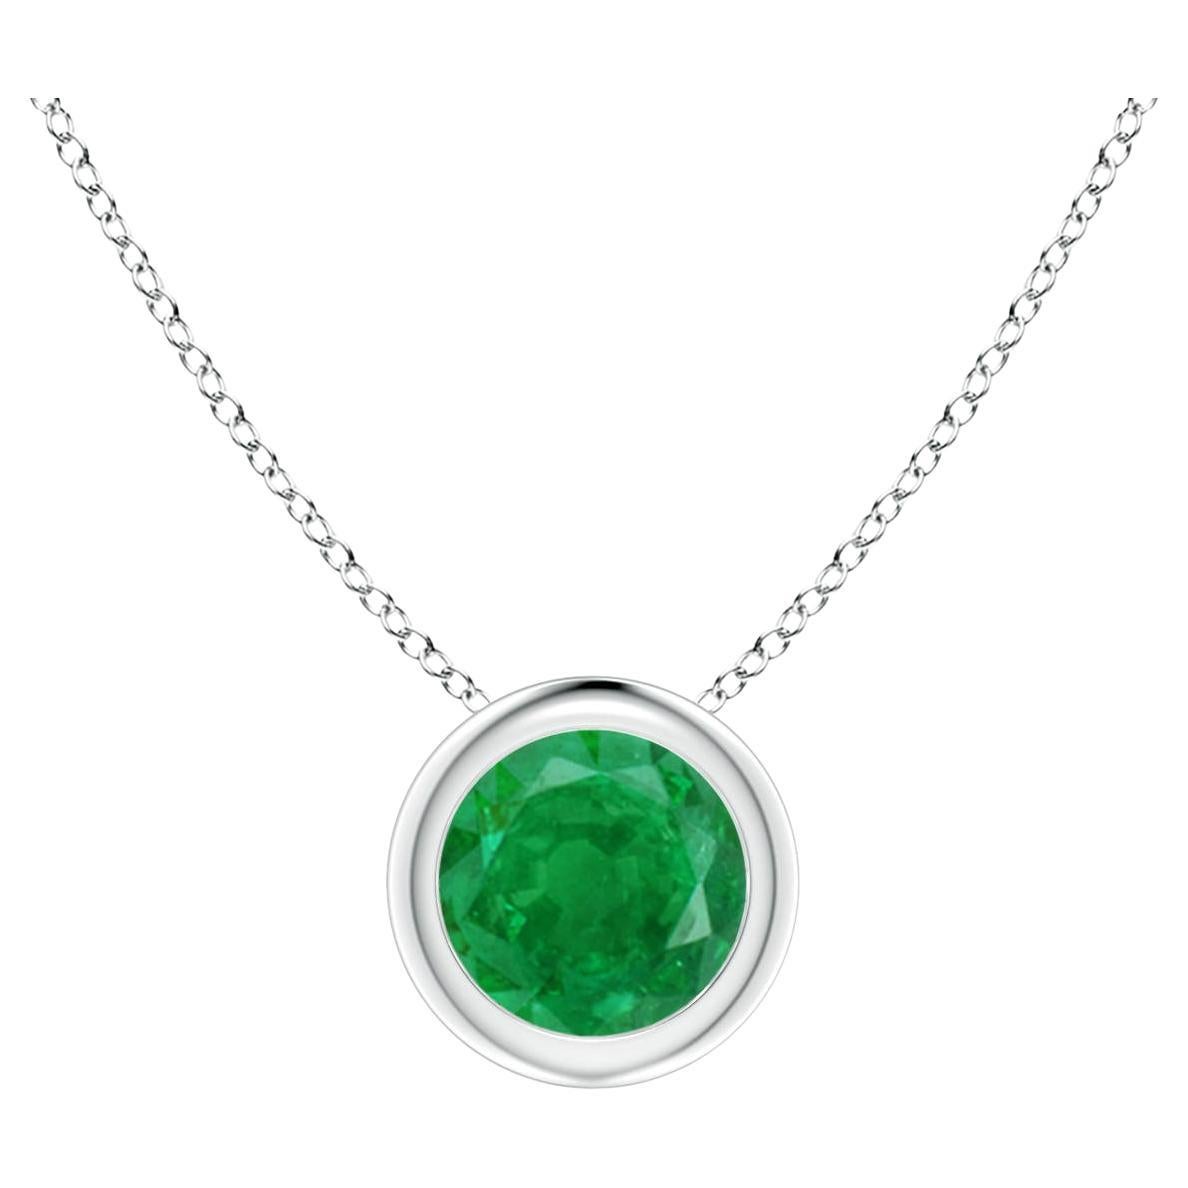 Natural Bezel-Set Round Emerald Solitaire Pendant in 14K White Gold (5mm)